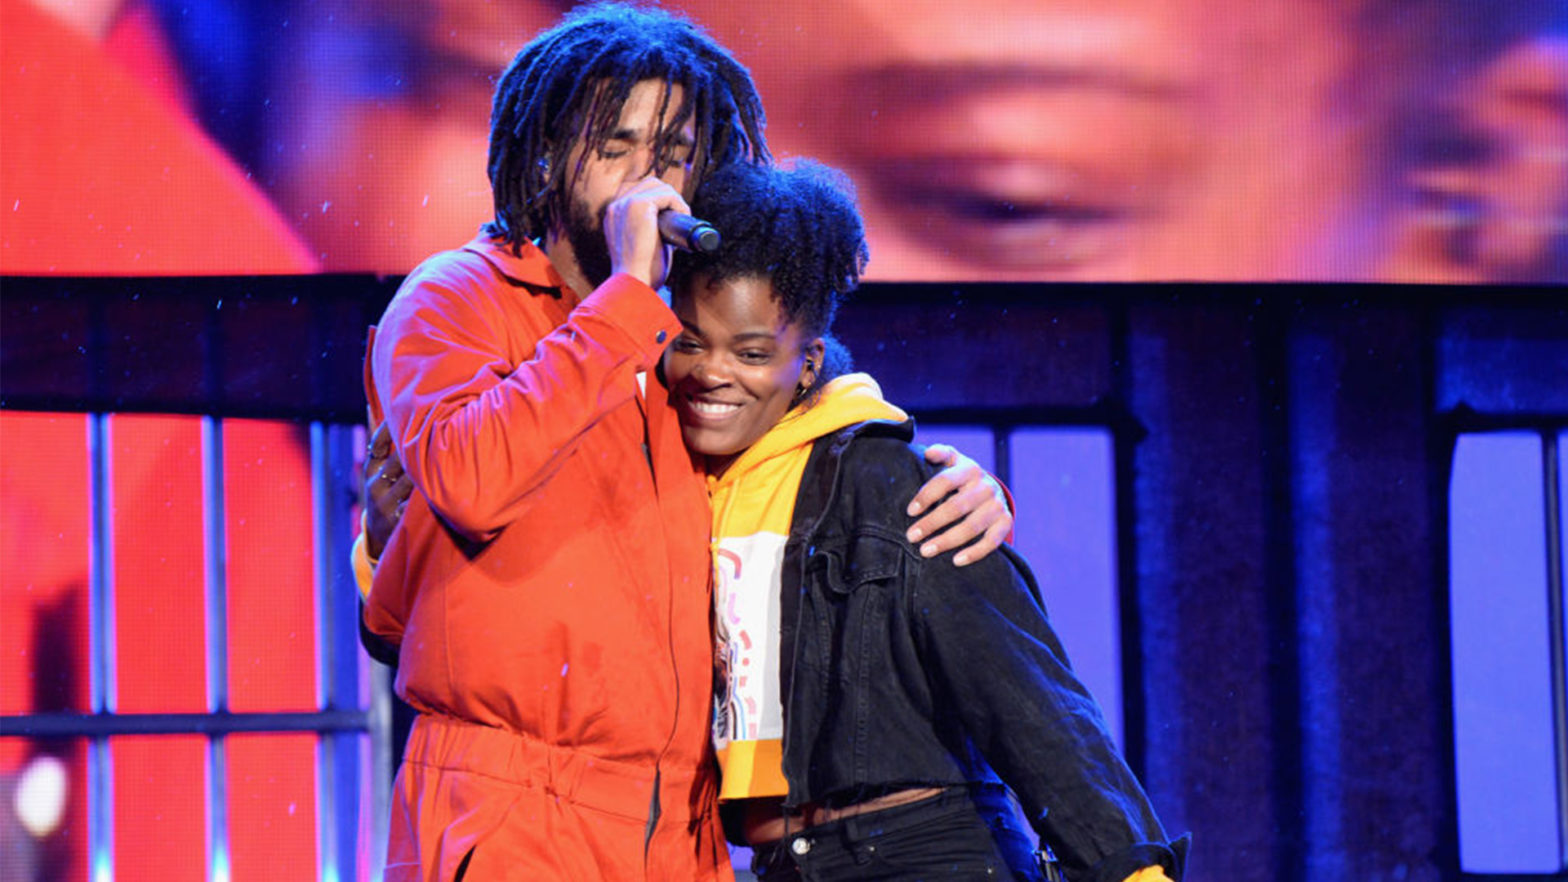 Ari Lennox Says She Was Afraid To Quit The 'Highest-Paid Job' She Ever Had To Go Meet With J. Cole To Sign To Dreamville